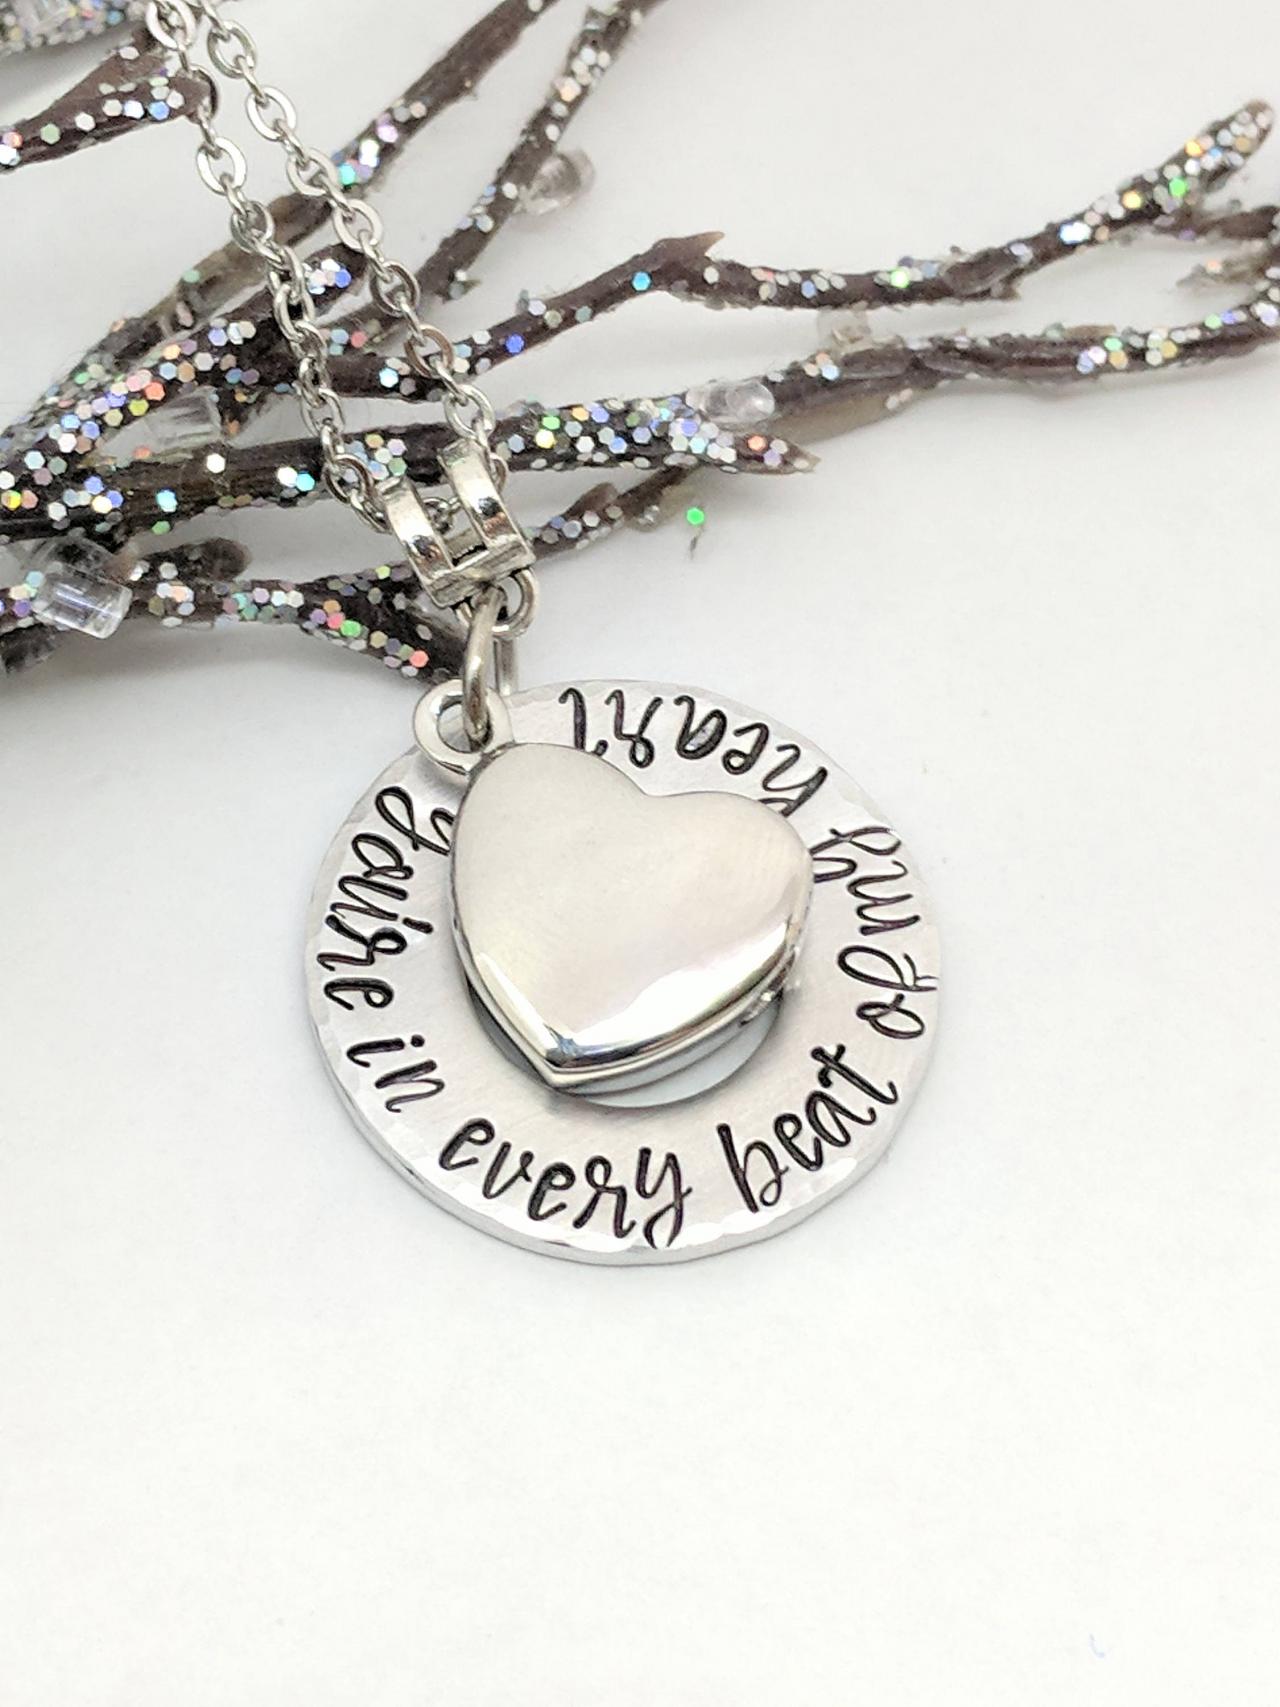 Urn For Ashes Hand Stamped Necklace-memorial Urn Keepsake Hand Stamped Jewelry-urn Necklace-heart Urn-ash Holder Jewelry-sympathy Gift-beat Of My